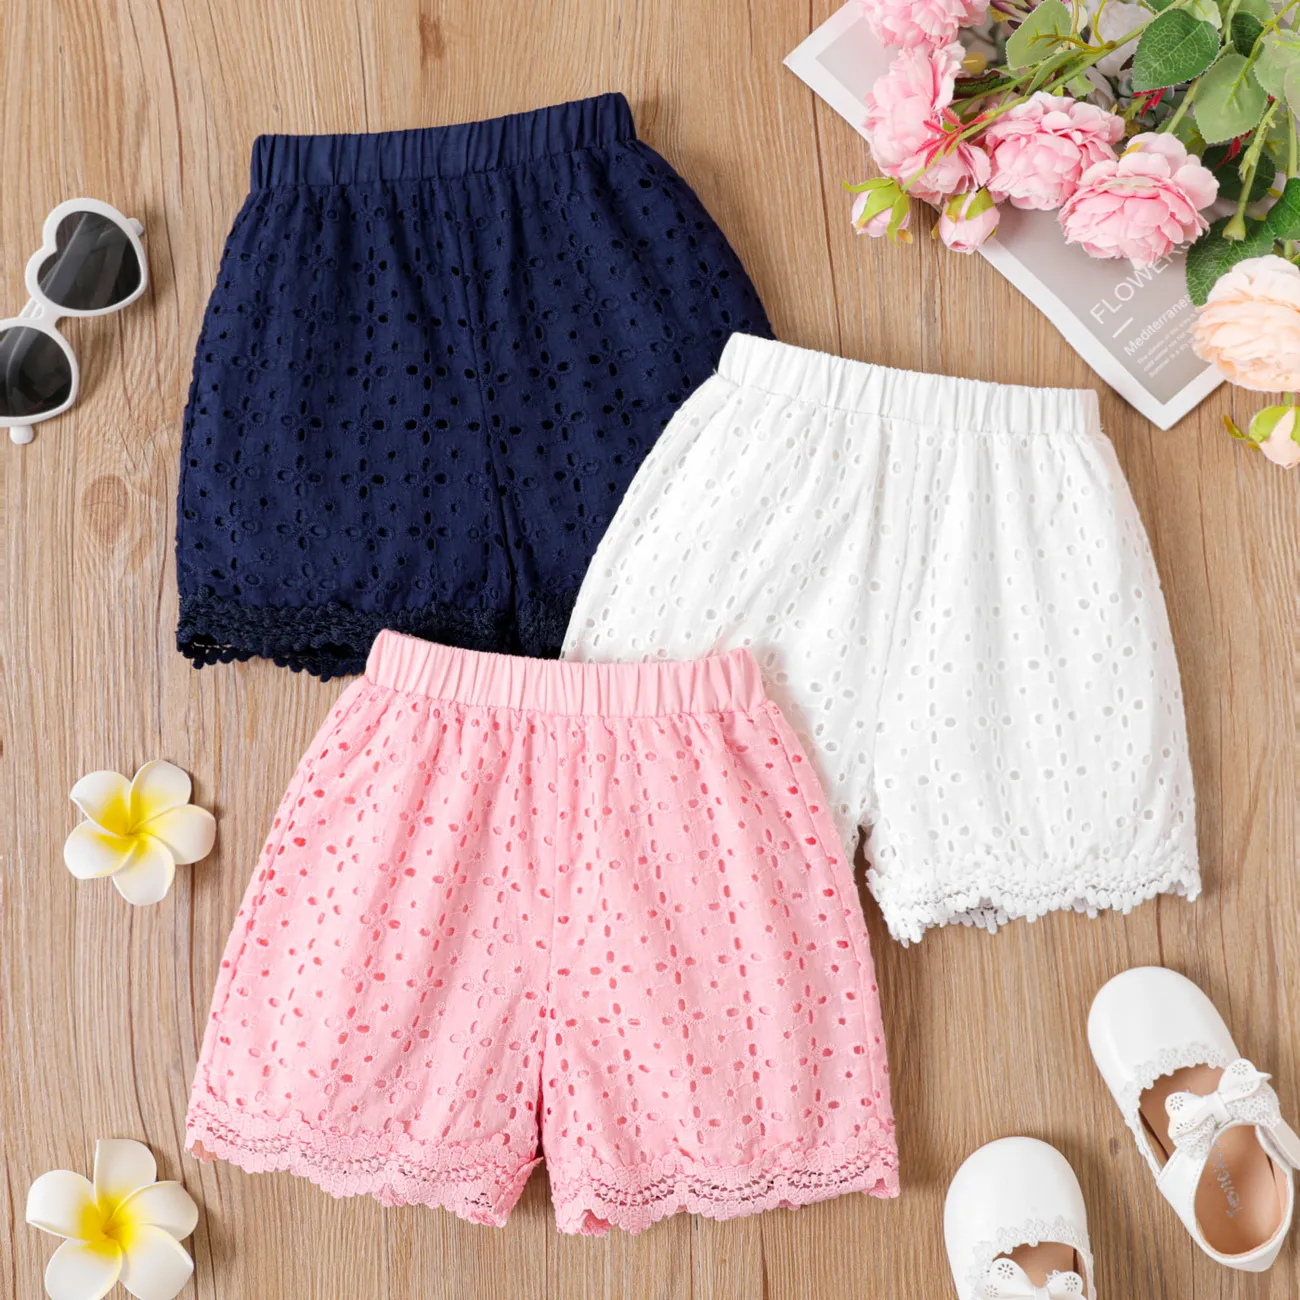 Lace-trimmed Shorts - White/floral - Ladies